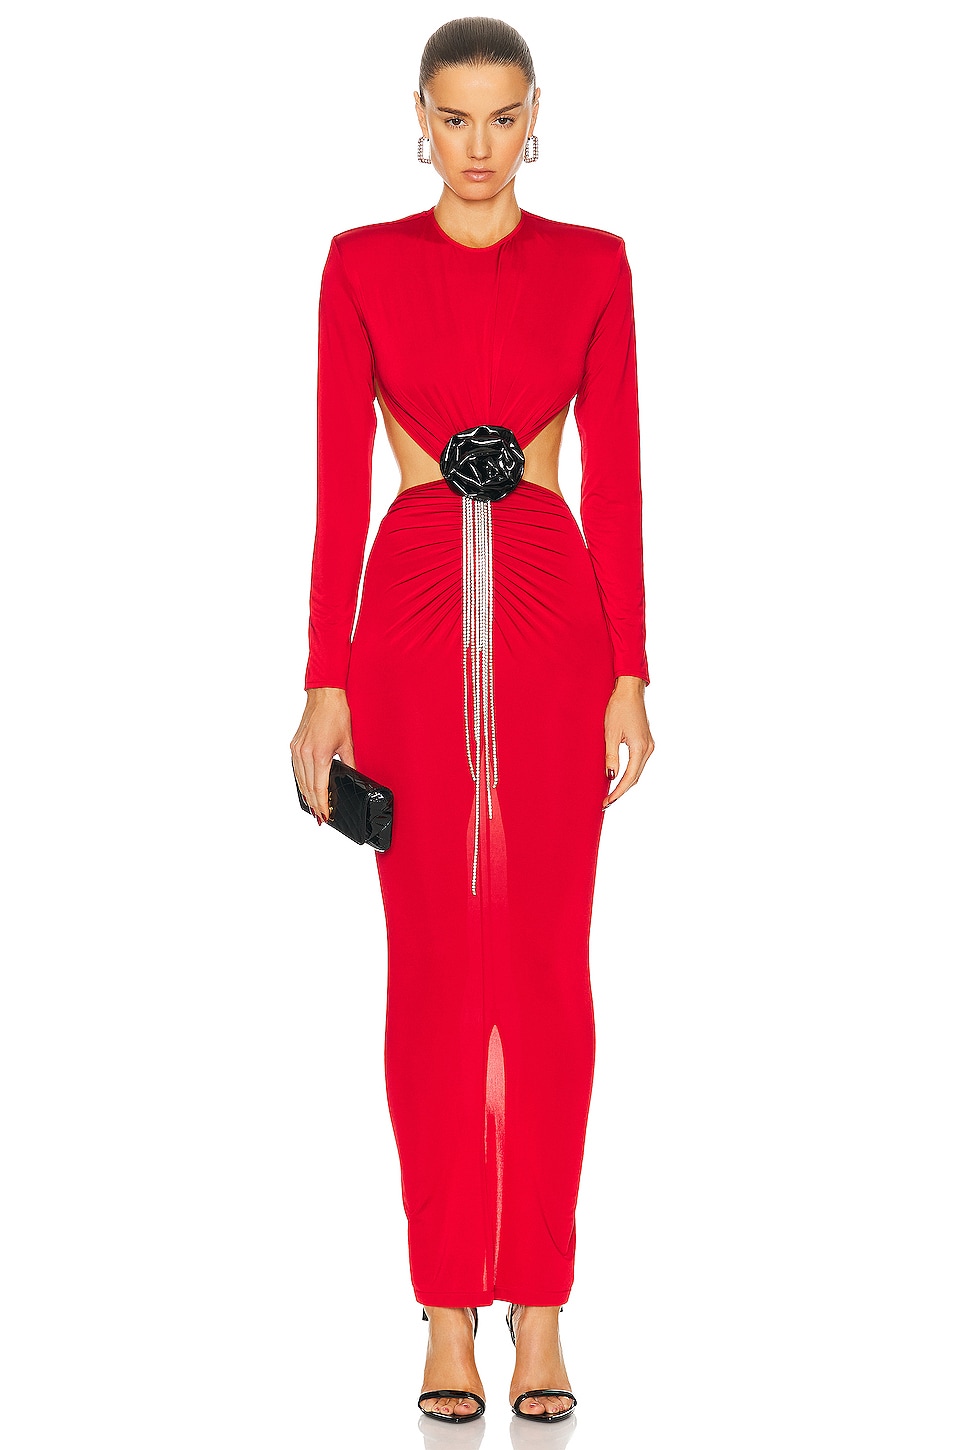 Image 1 of The New Arrivals by Ilkyaz Ozel Thea Dress in Rouge Dada